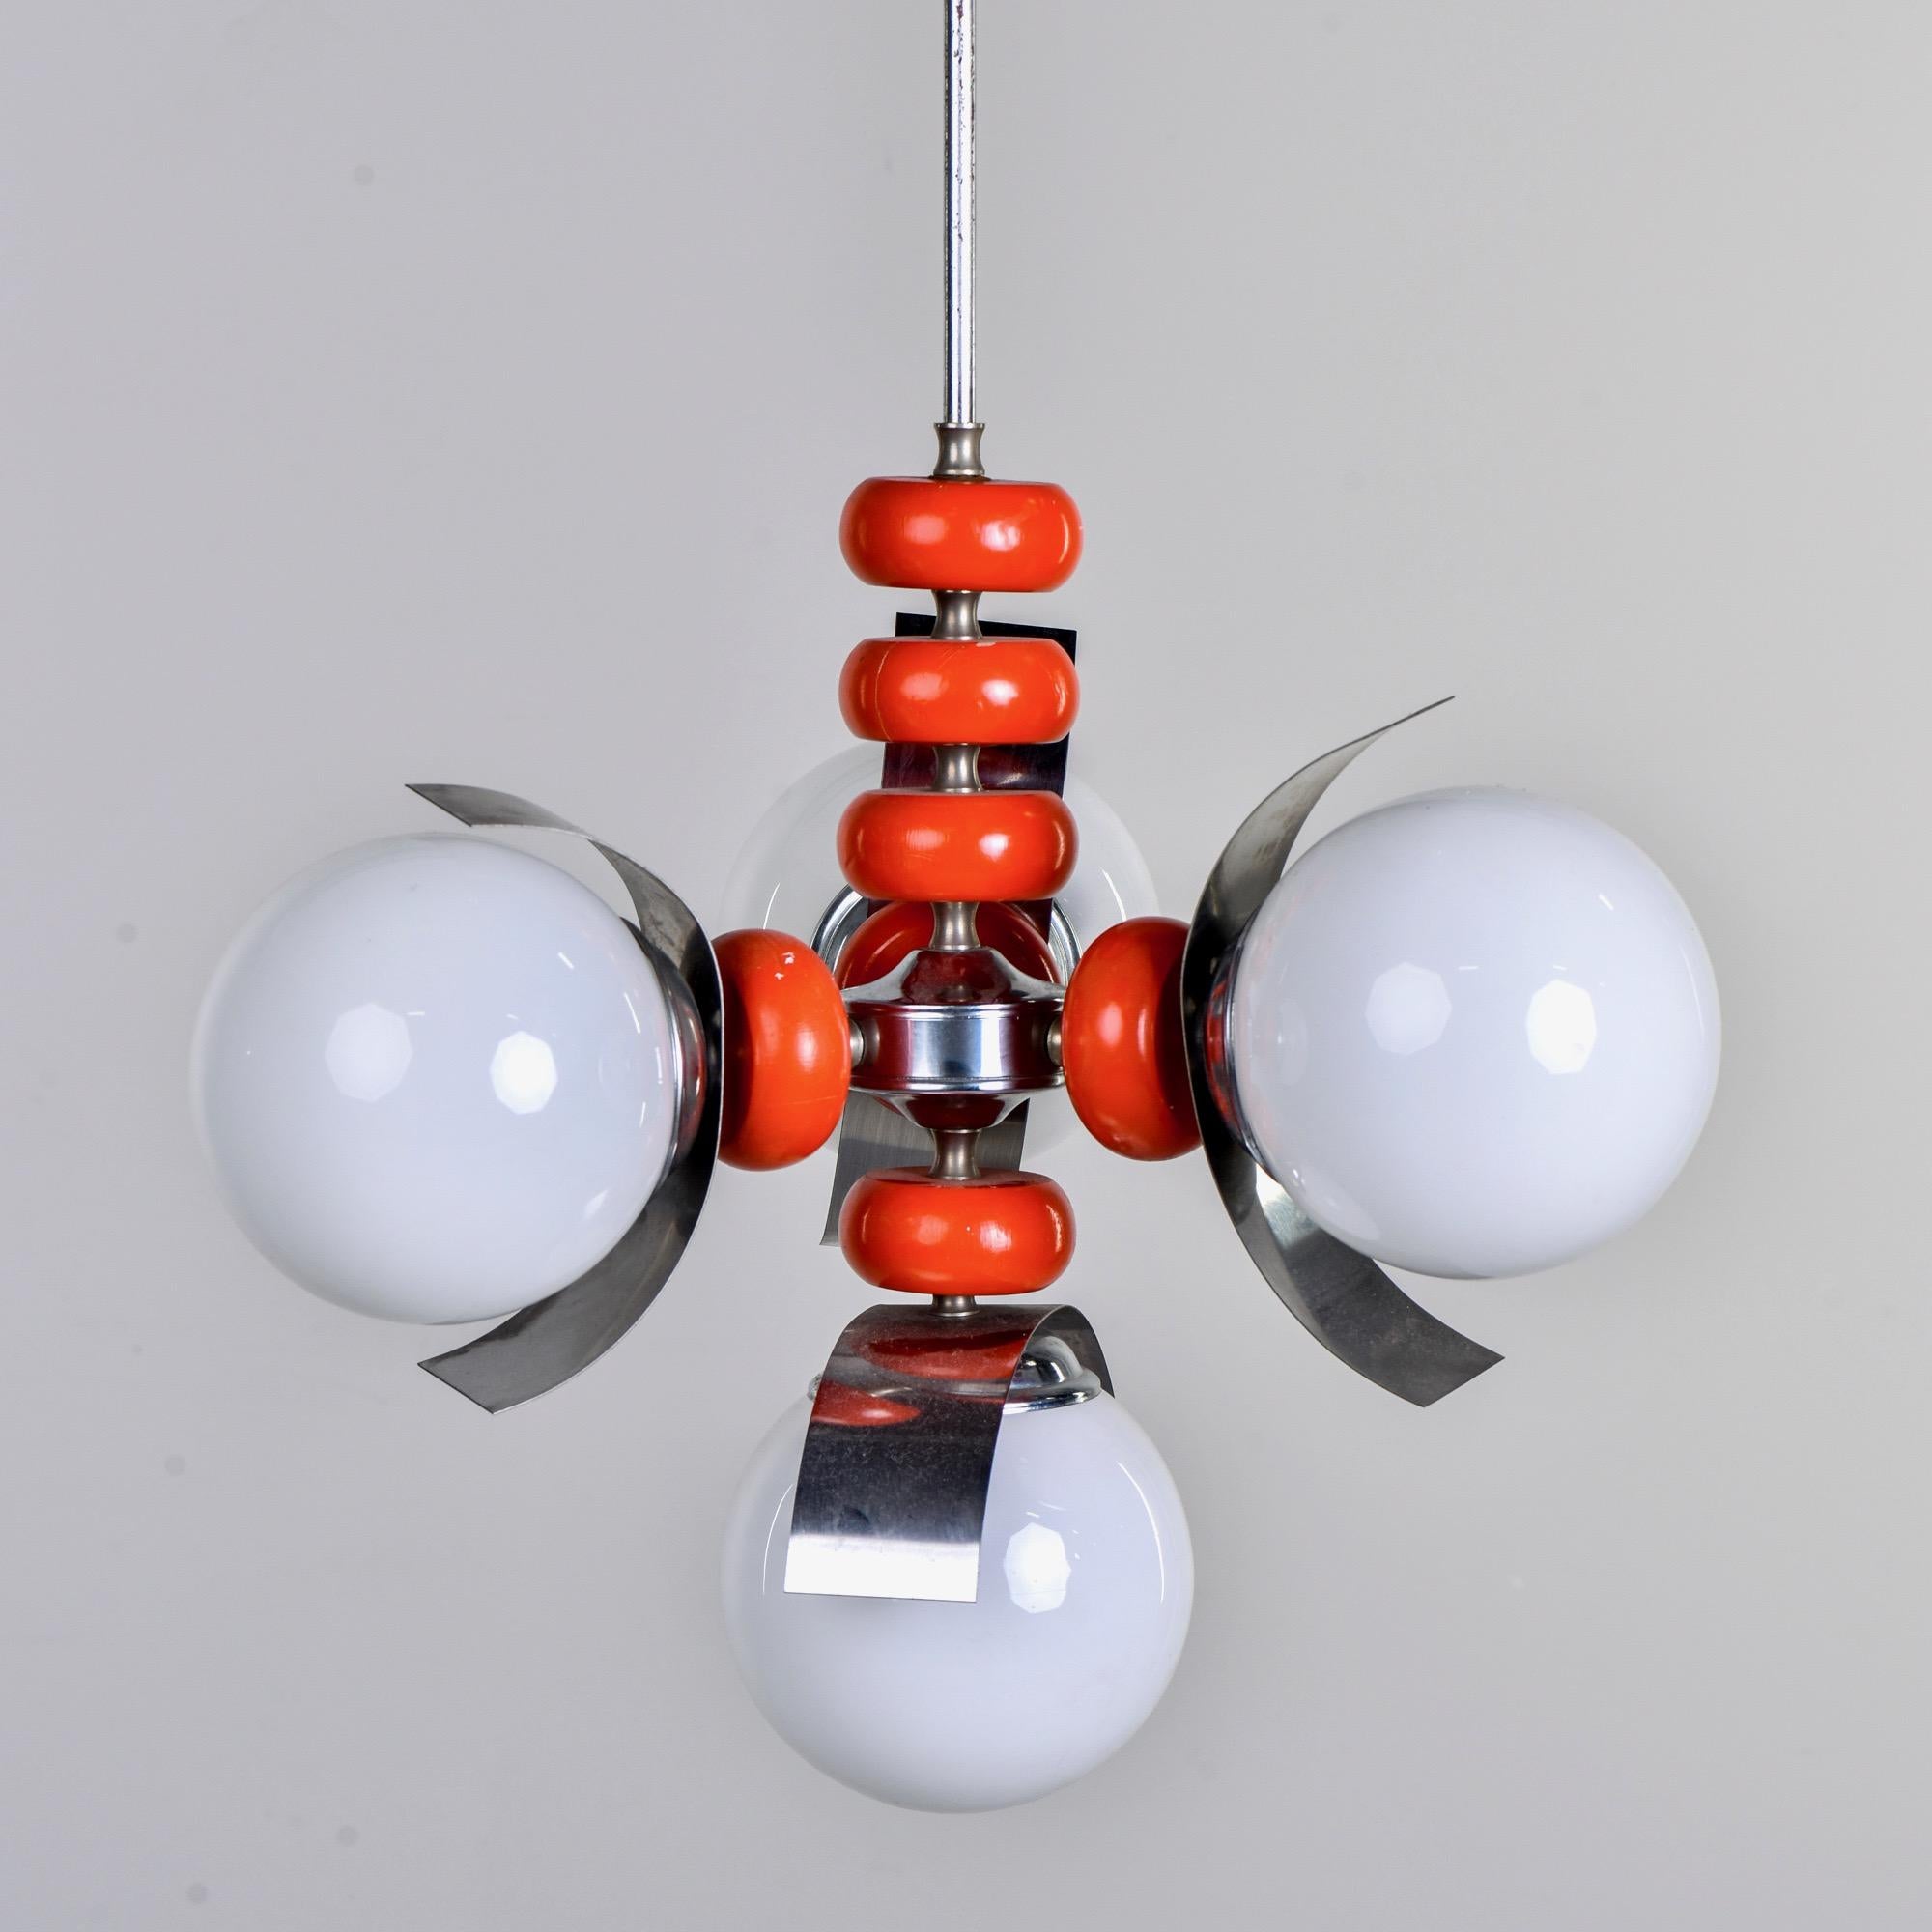 Circa 1960s four light pendant fixture attributed to Mazzega. Chrome canopy and rod with four white glass globes, orange-red wooden beads and chrome accents. New wiring for US electrical standards.

New wiring for US standards.

Some scattered